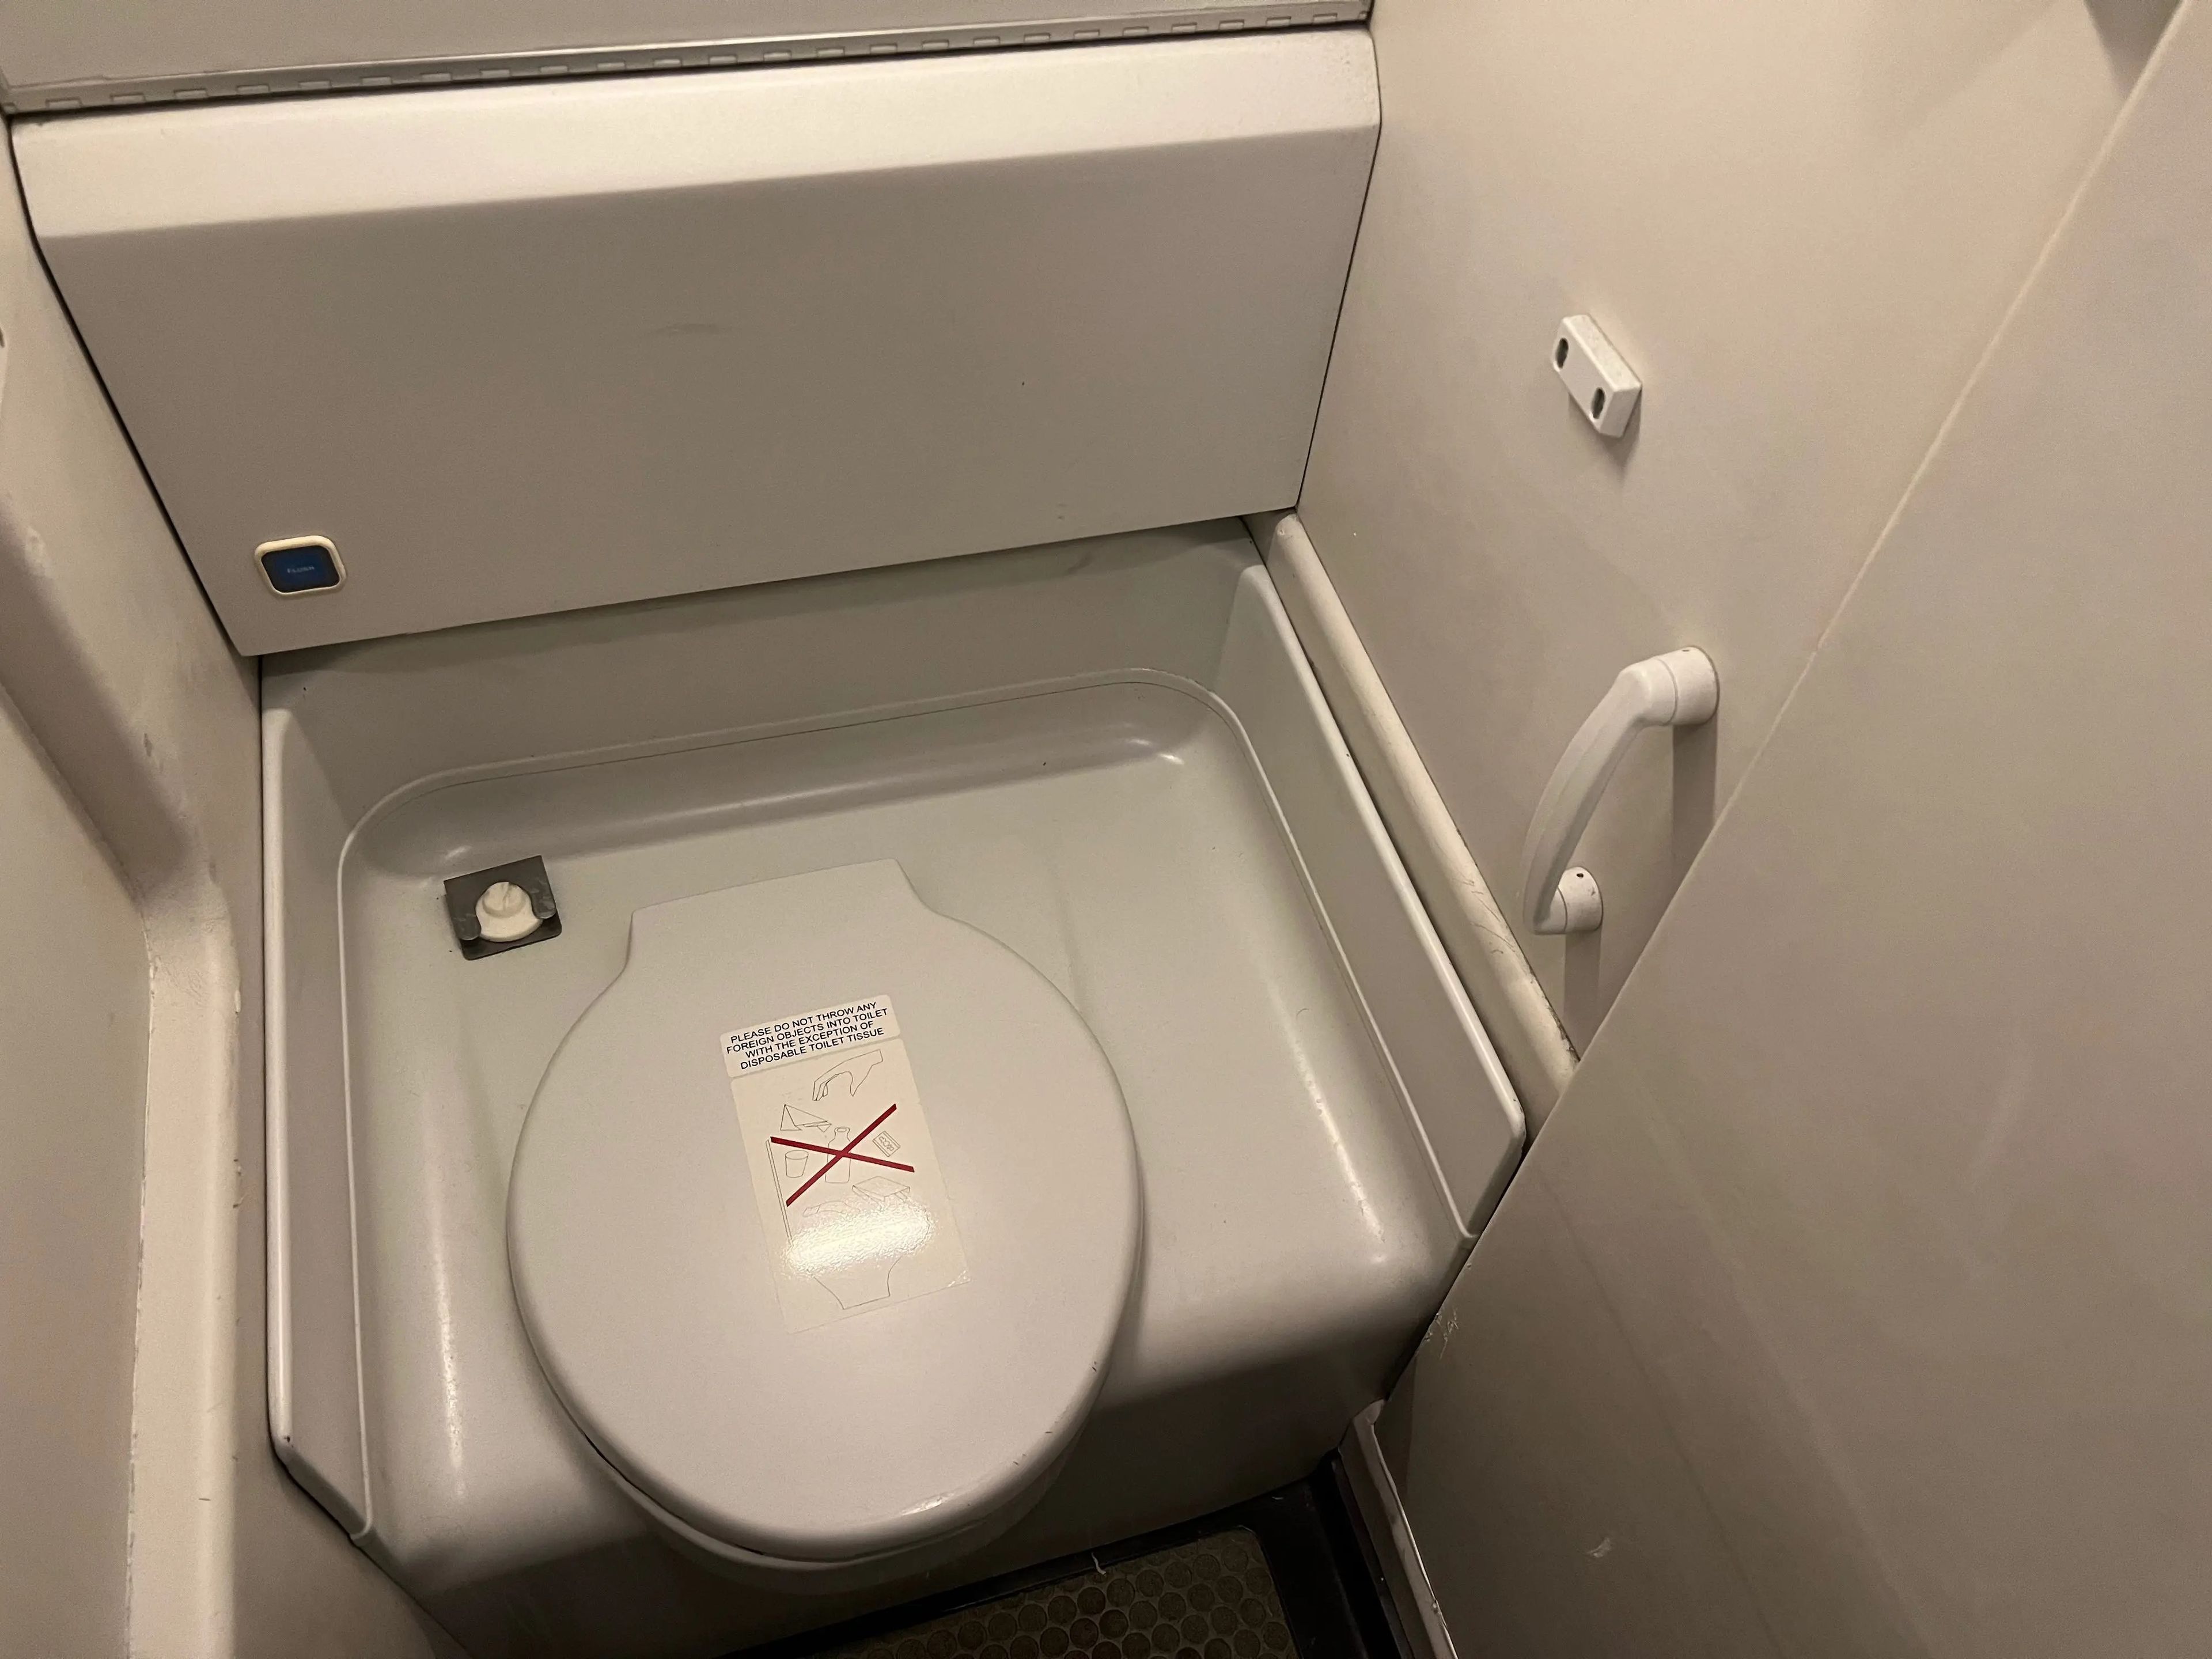 A grey toilet installed in the bathroom facilities on the plane.